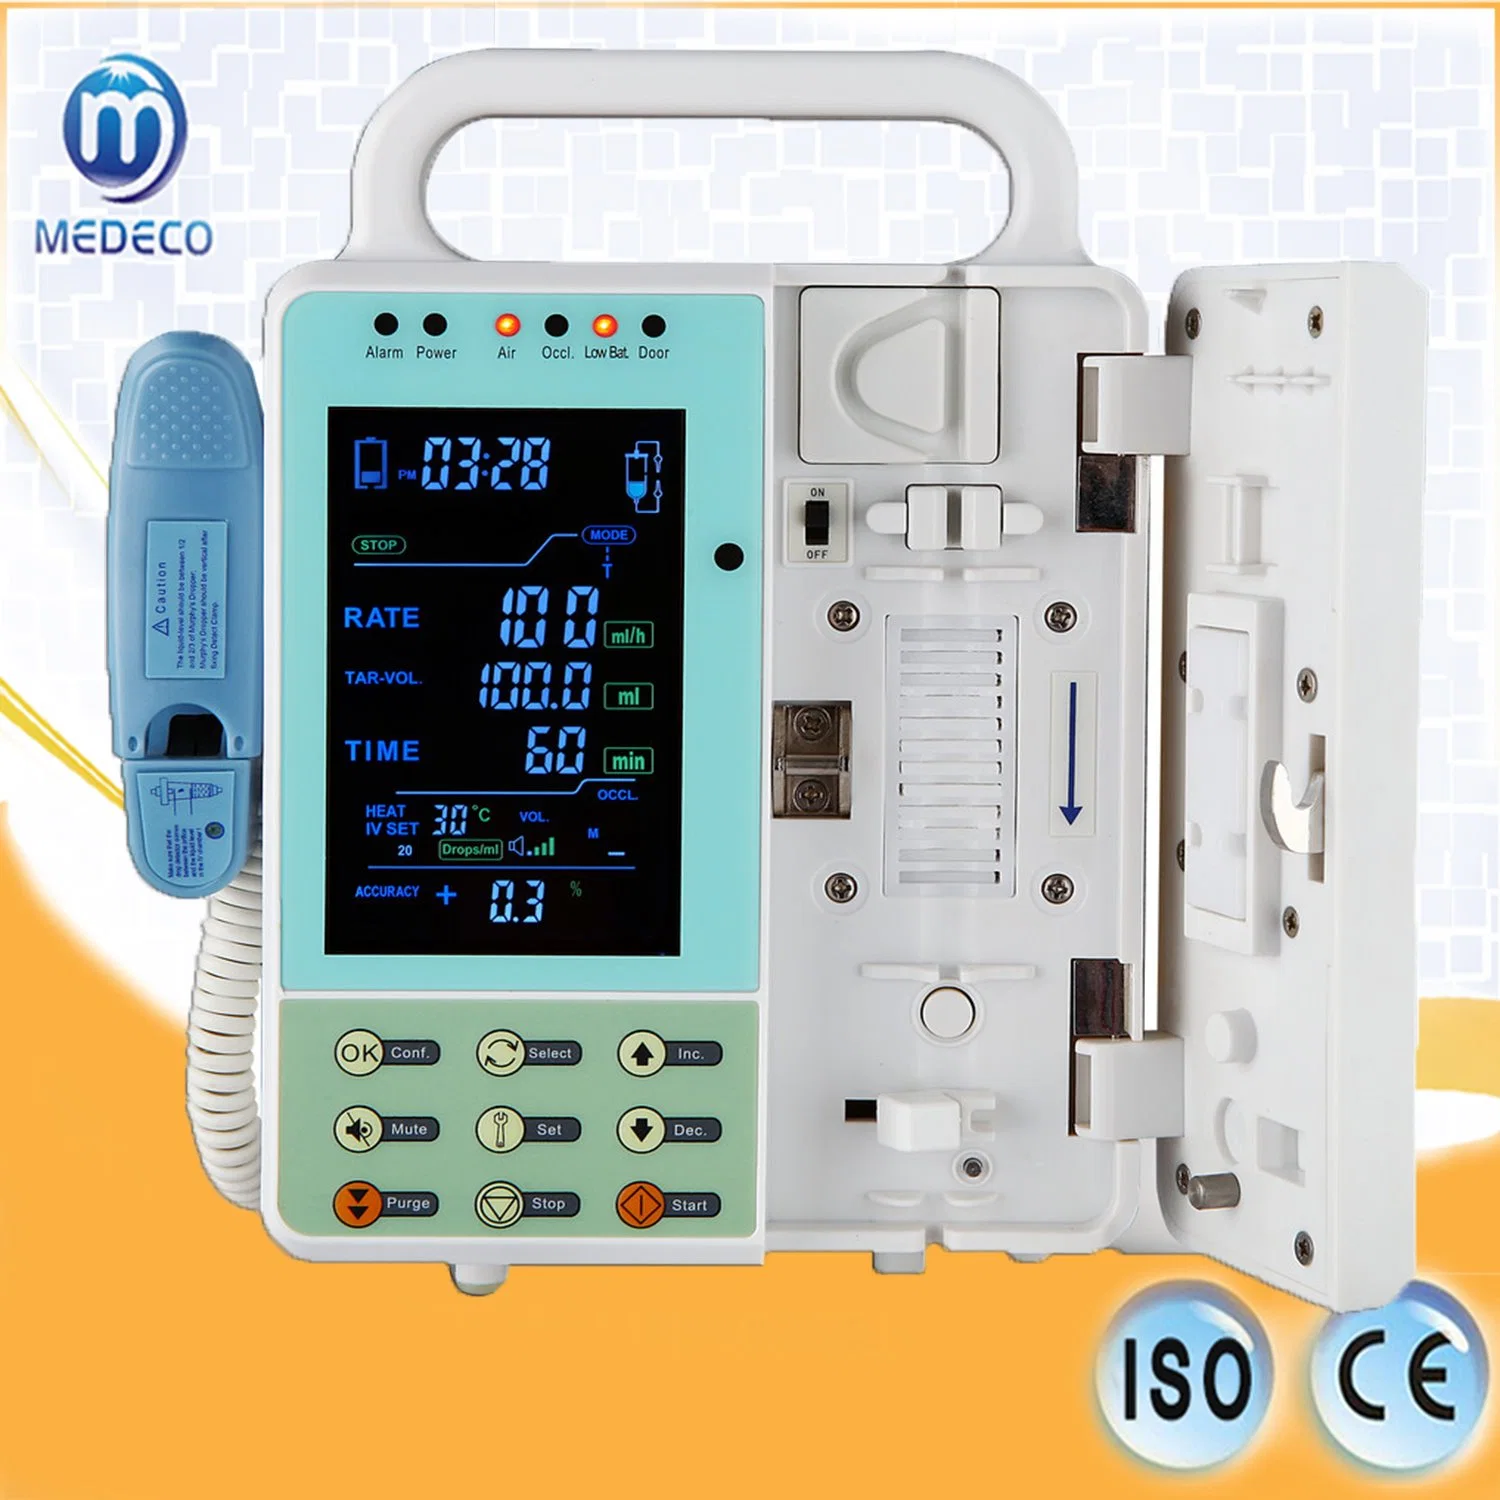 Medical Syringe Infusion Pump, Patient Infusion Pump, Hospital Infusion Injection Pump Model Oip-900